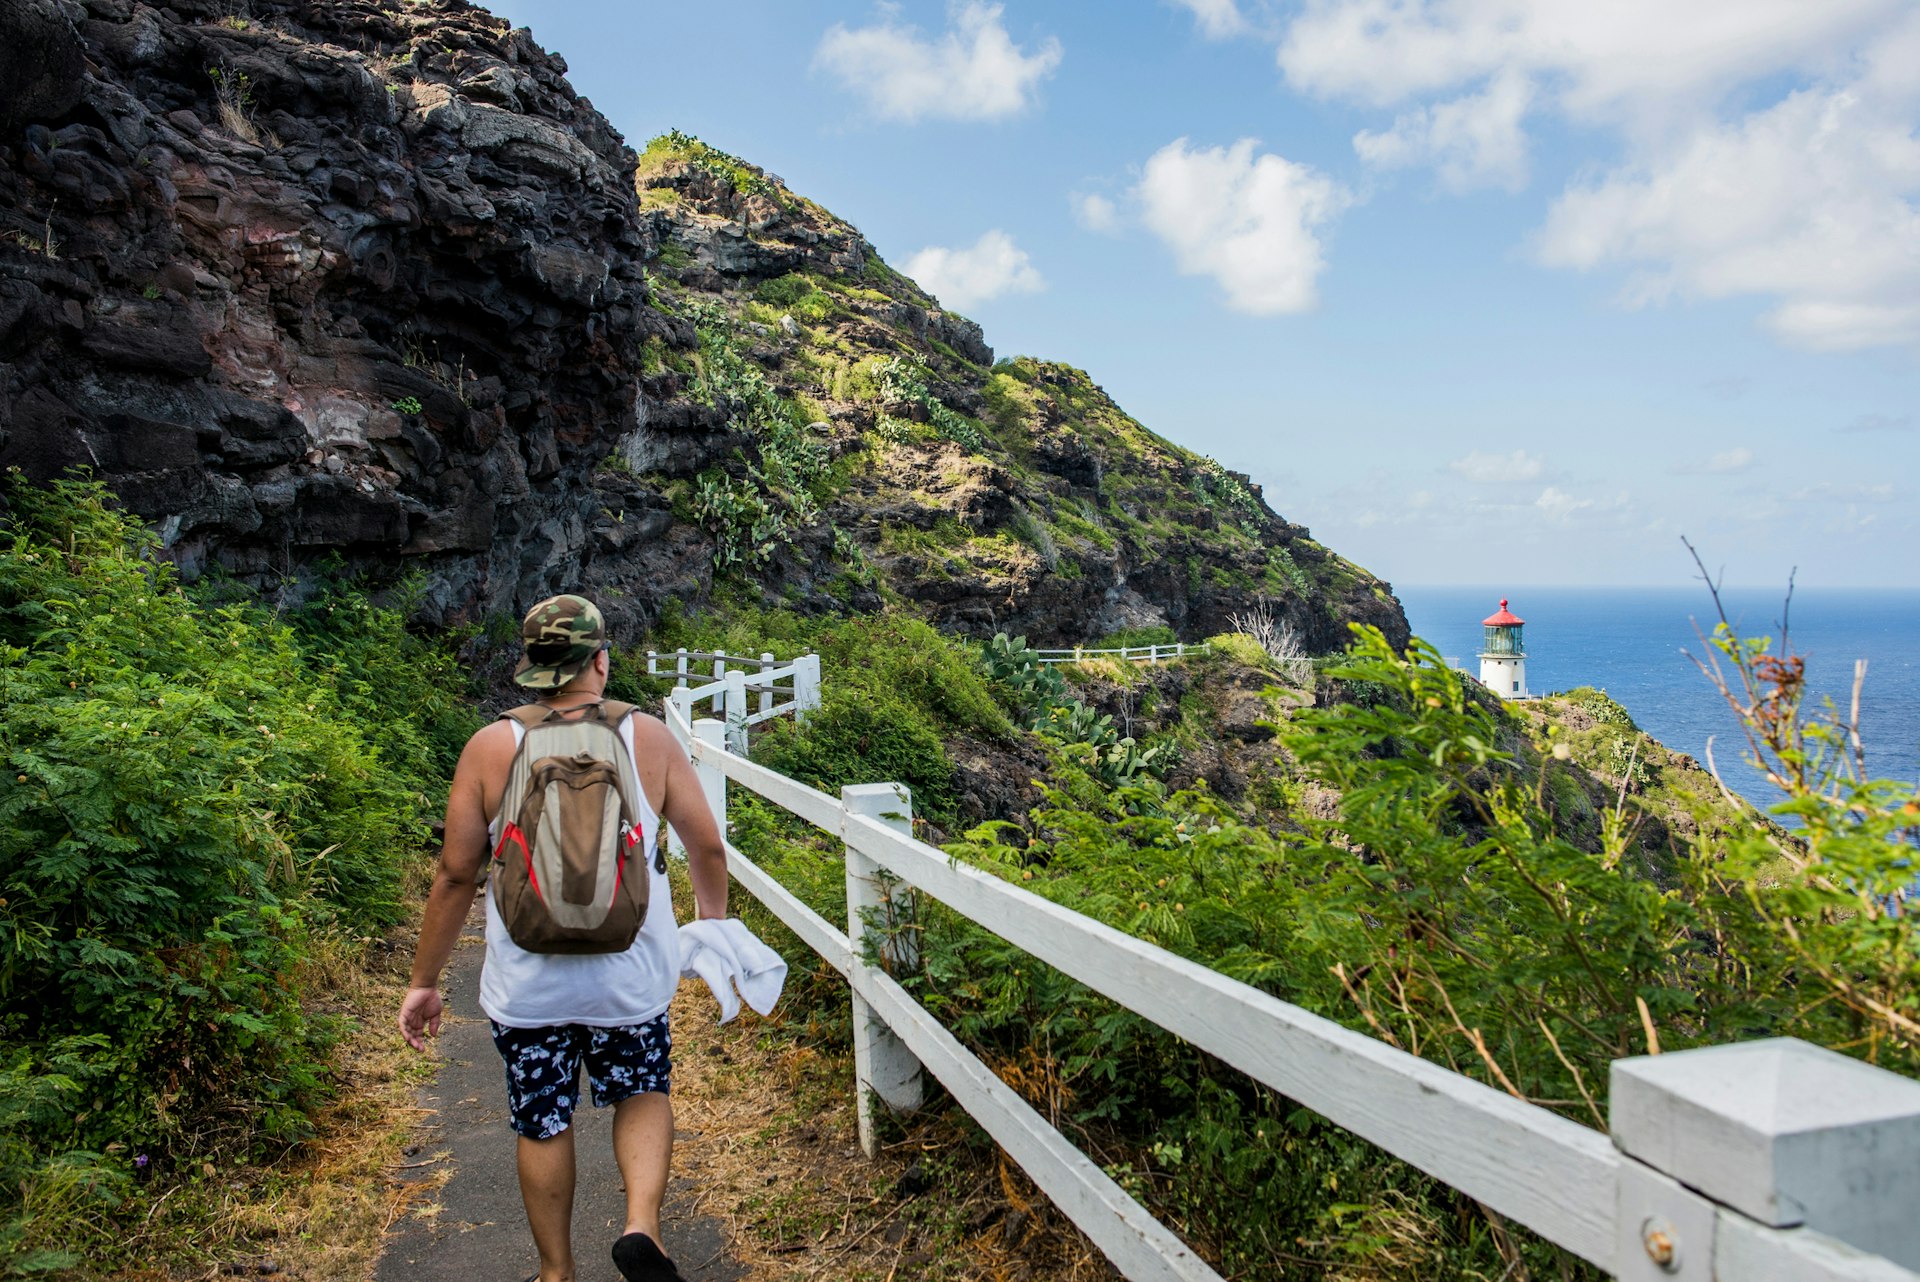 A white man in a baseball cap and shorts hikes along the Makapu'u Point Lighthouse Trail in Hawaii with the lighthouse itself in the far background, overlooking the sea